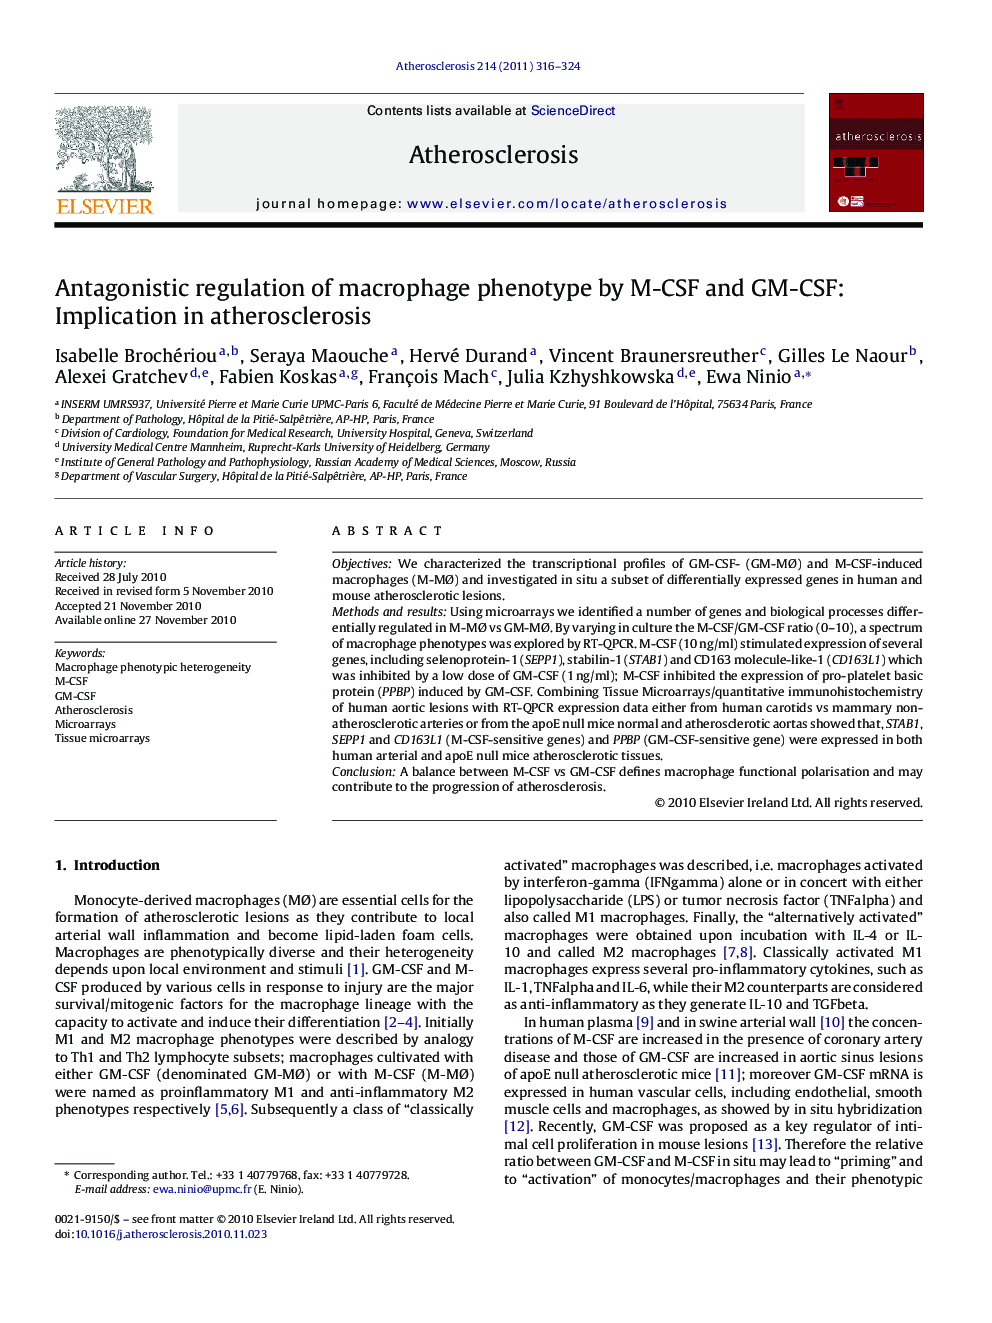 Antagonistic regulation of macrophage phenotype by M-CSF and GM-CSF: Implication in atherosclerosis